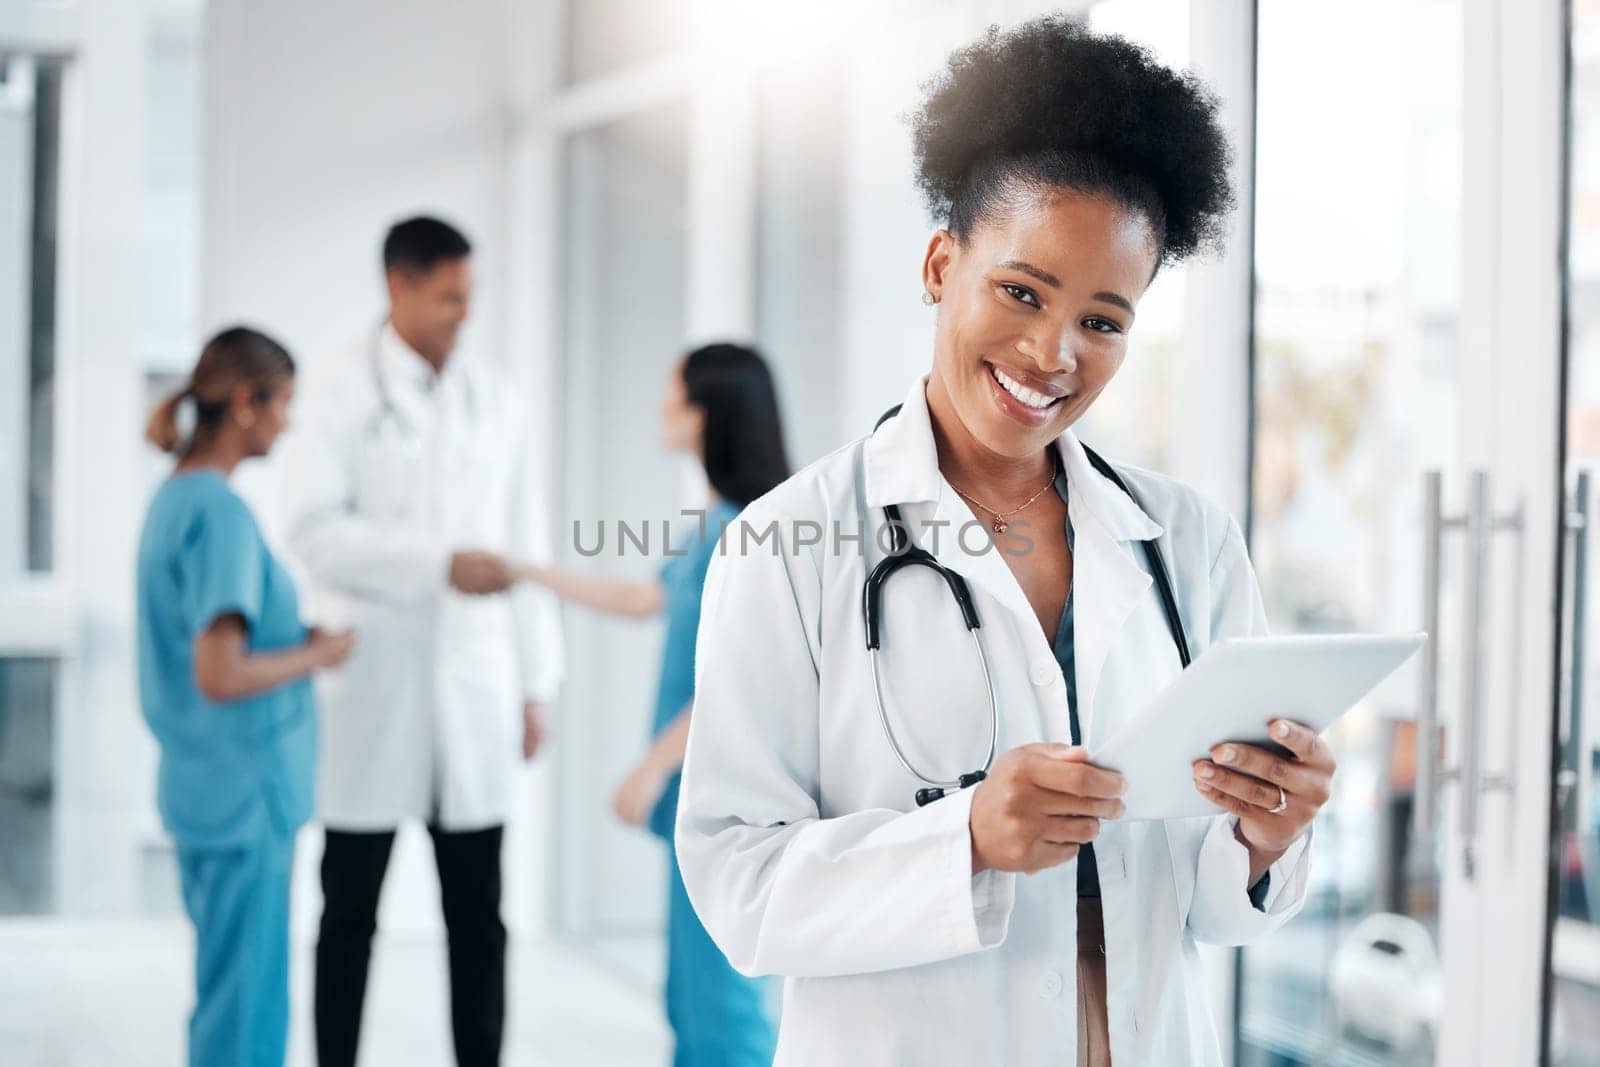 Research, portrait and black woman with tablet for healthcare, medicine and internet information. Schedule, communication and African doctor with technology for medical service, telehealth and email.